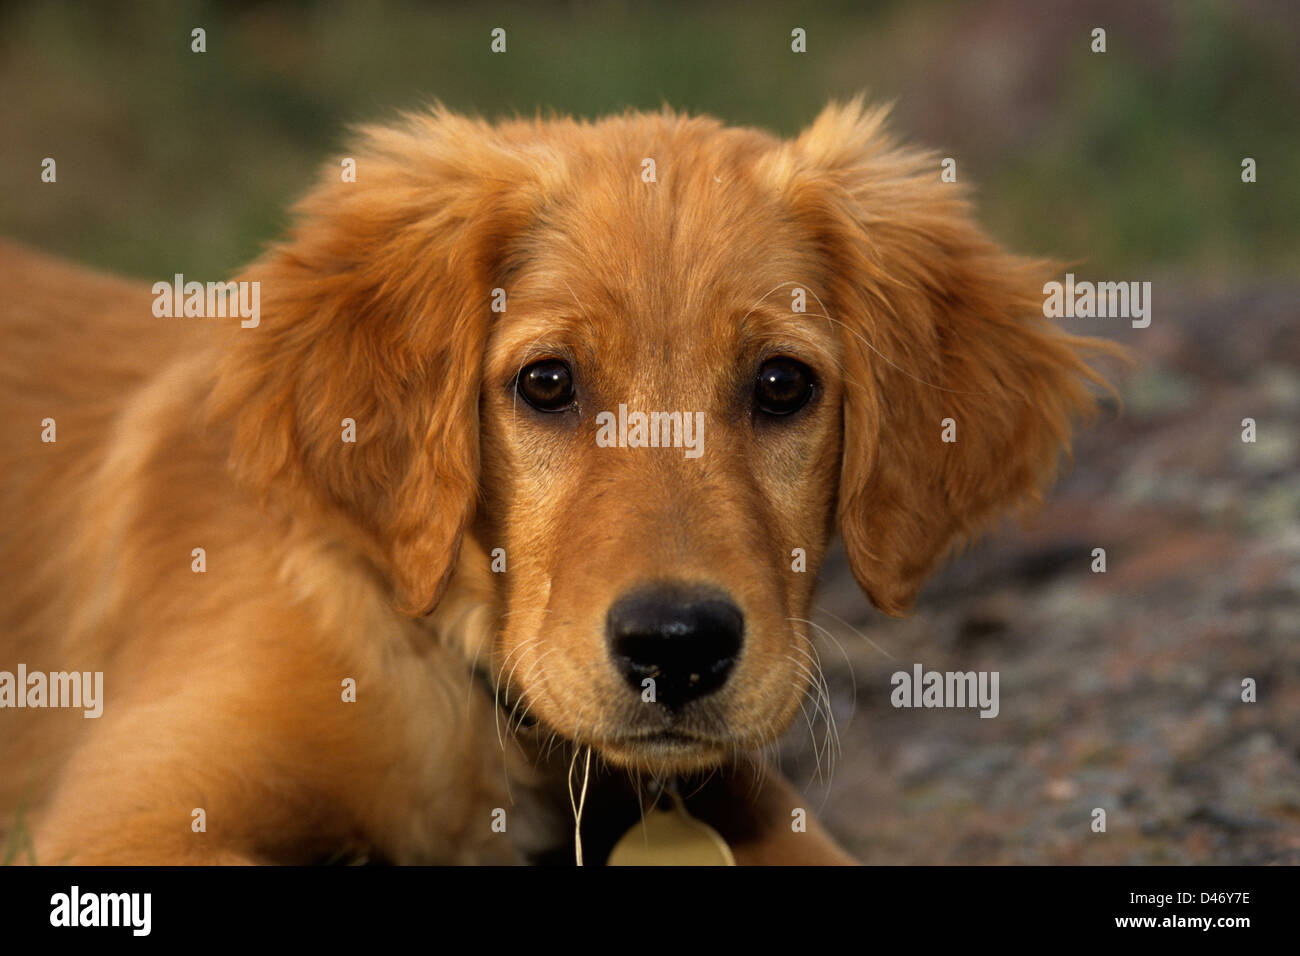 Golden Retriever Puppy About 3 Months Old Stock Photo Alamy